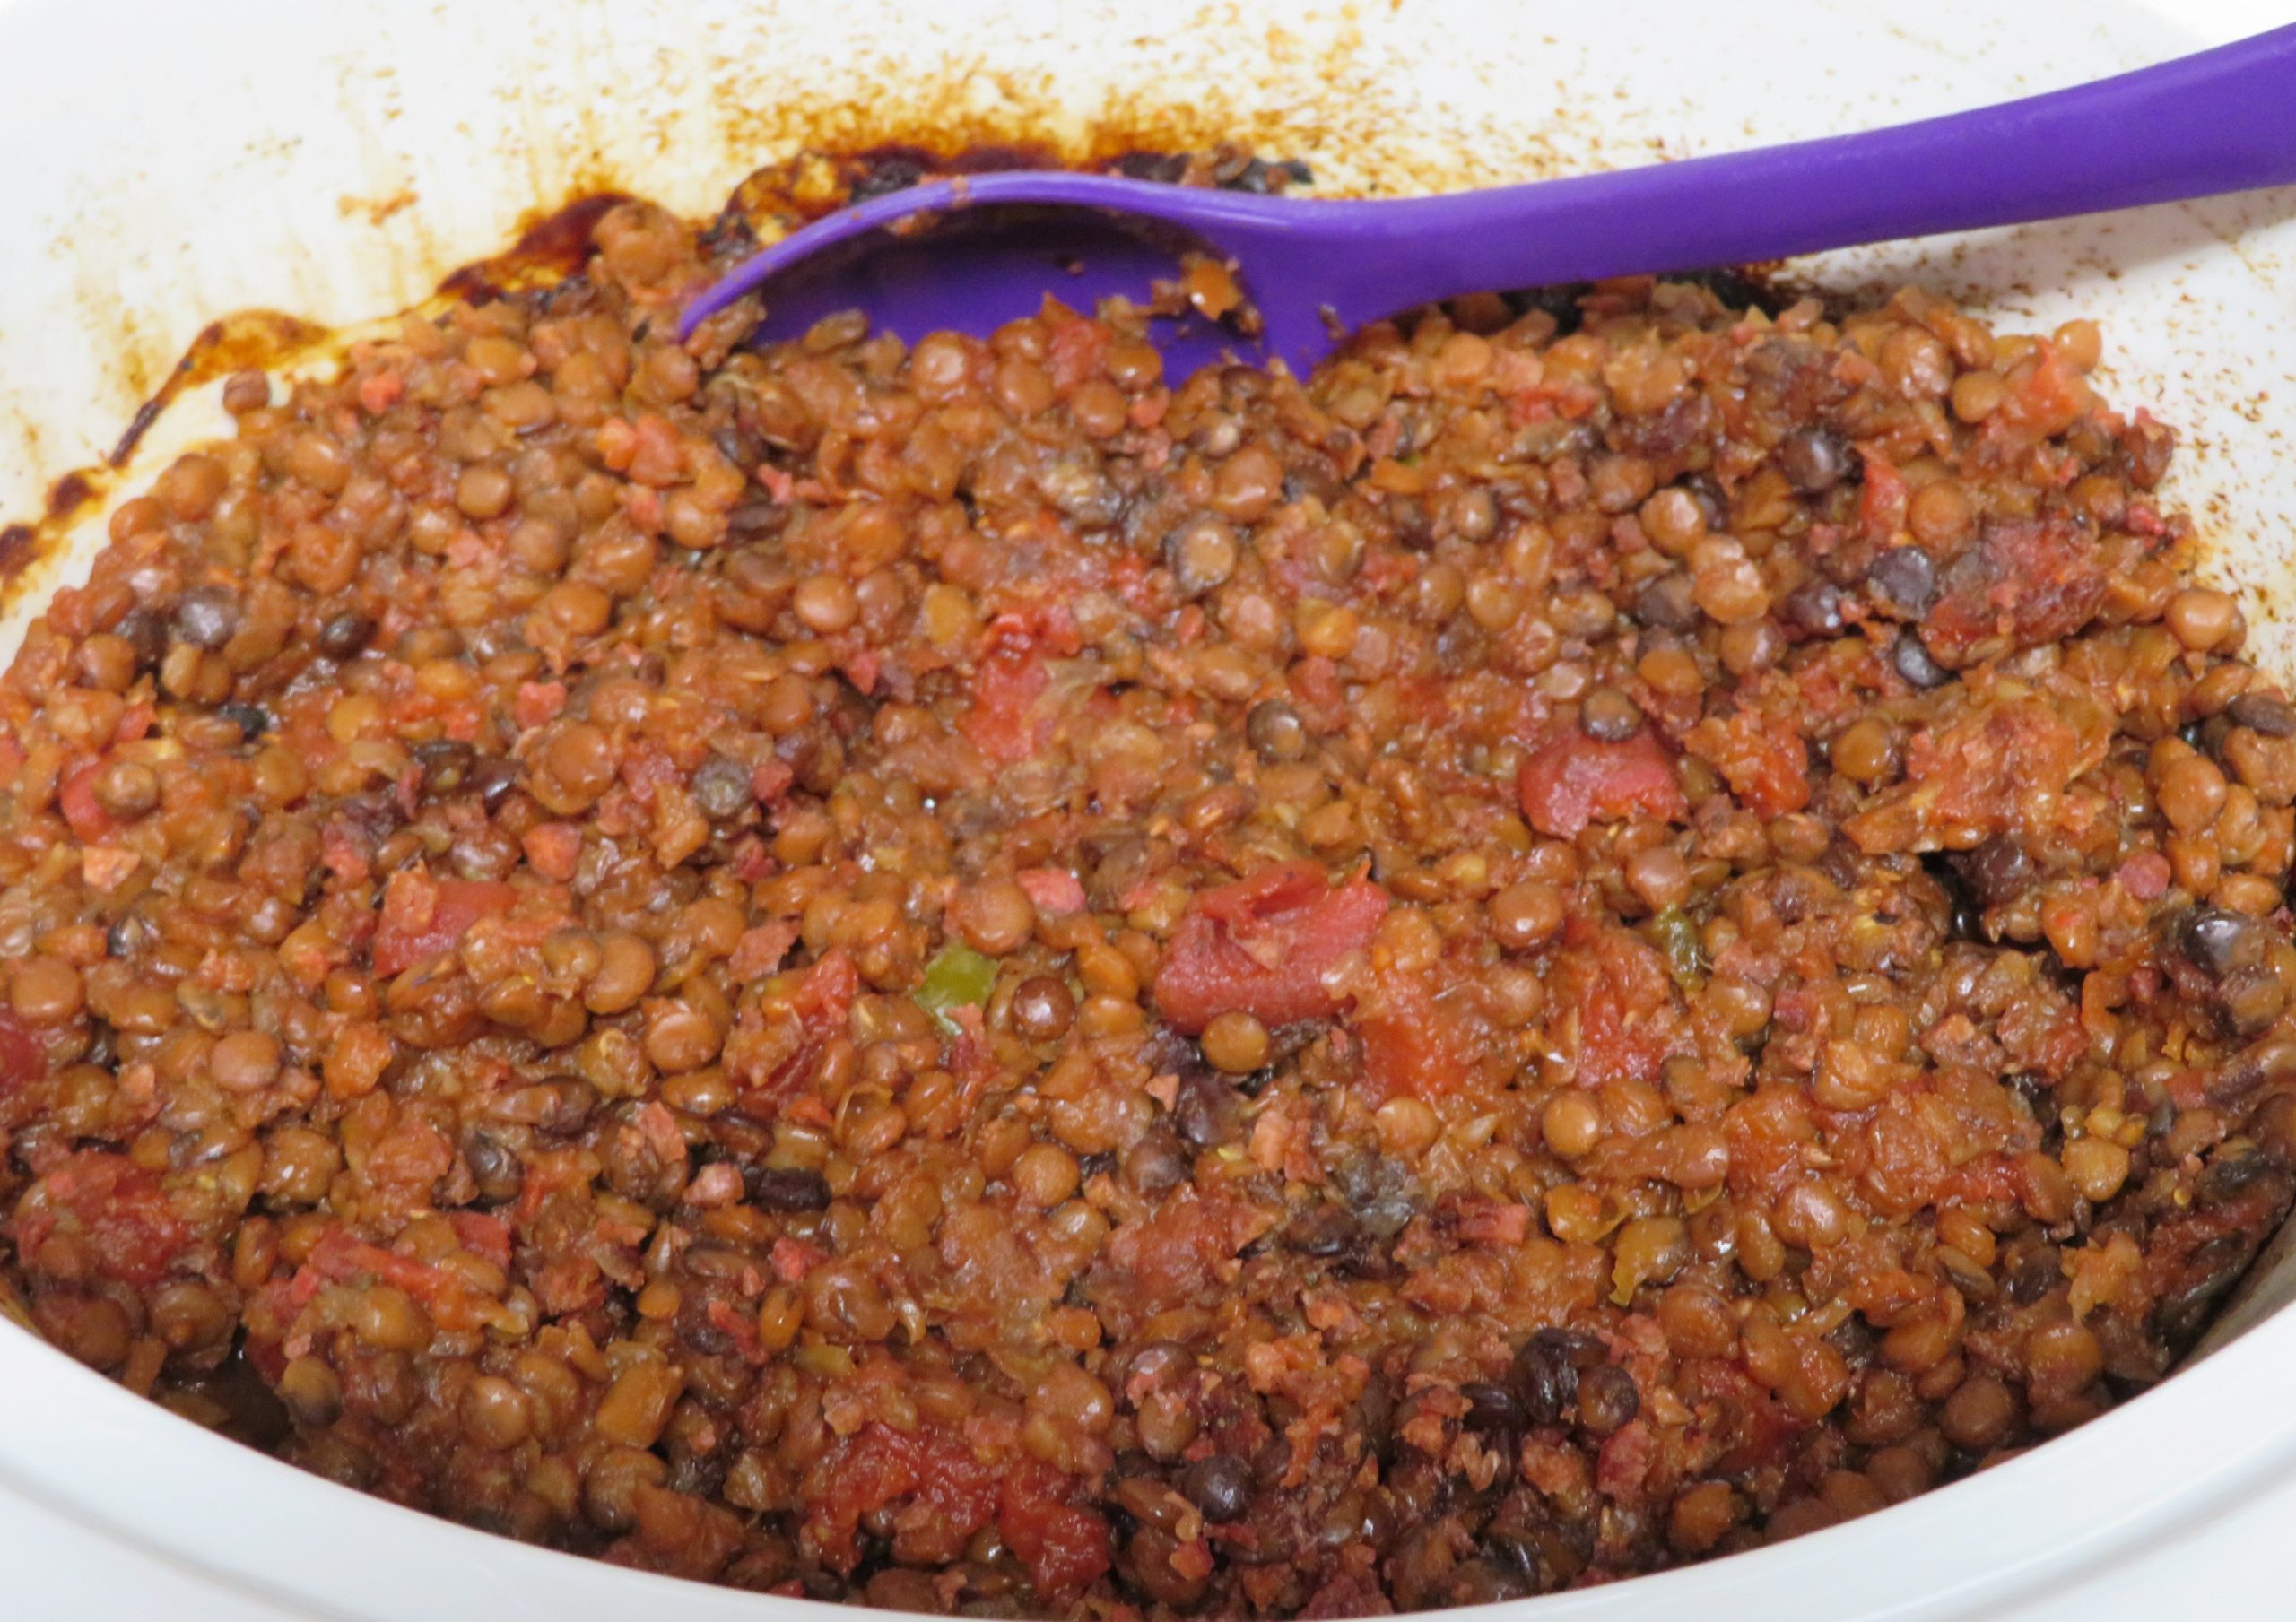 Cooked Crockery Lentils in a slow cooker